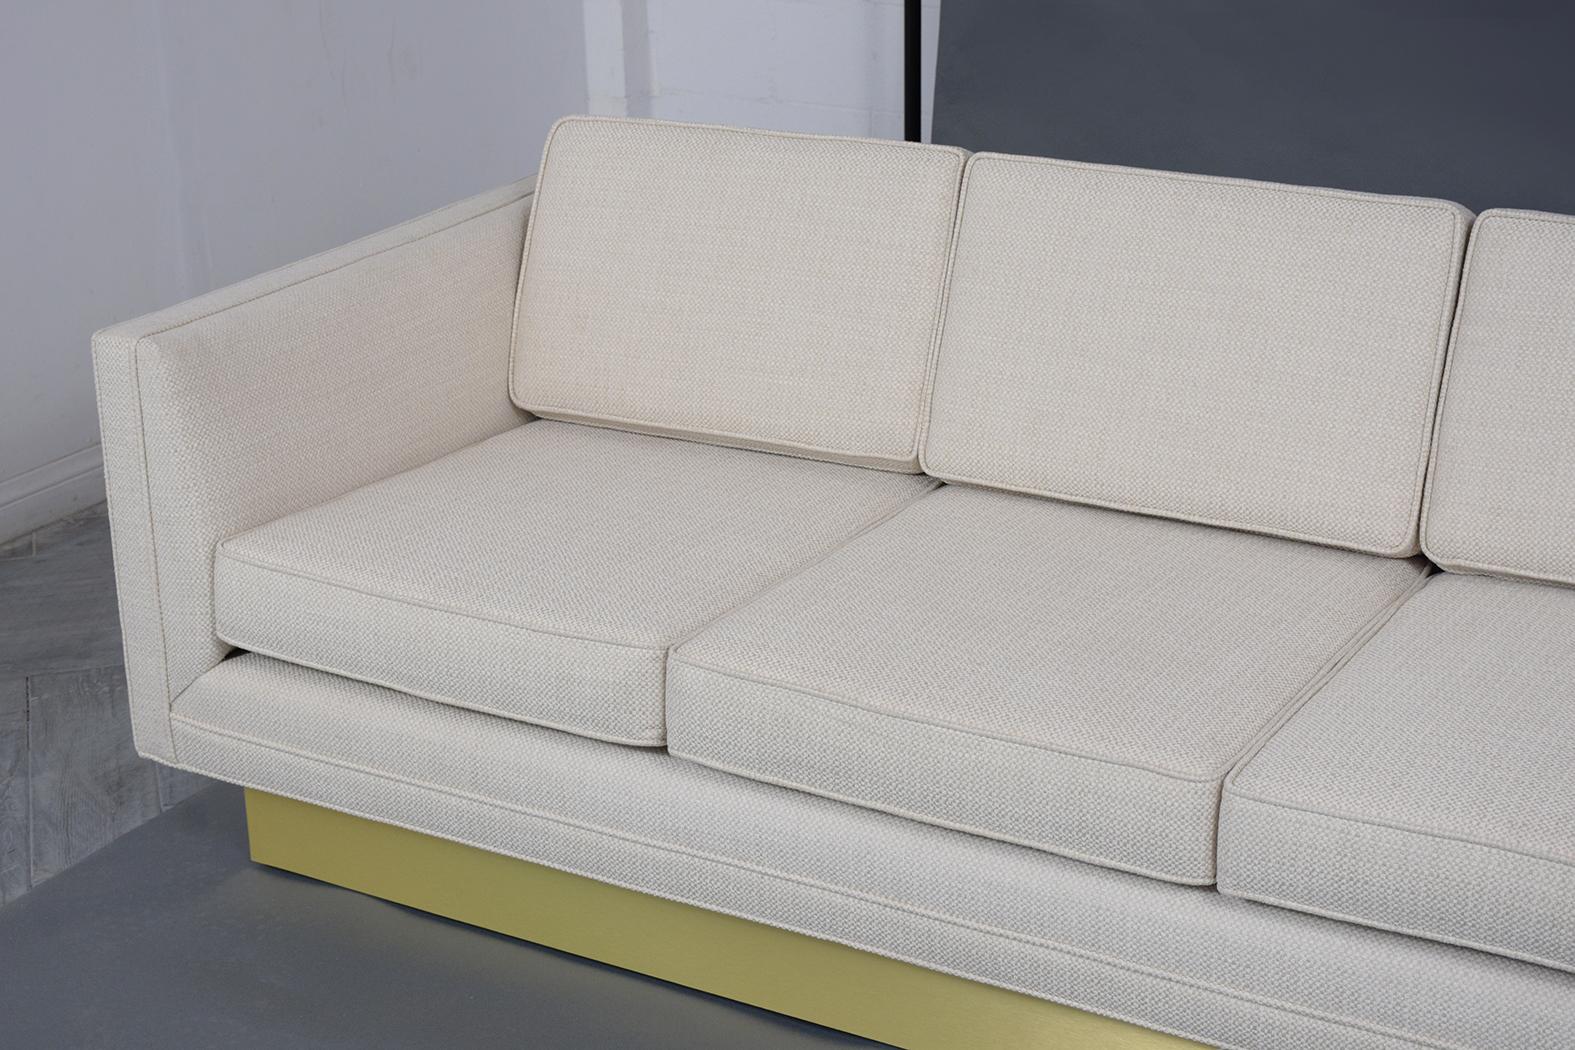 Plated Restored Vintage 1960s Executive Sofa: Mid-Century Modern Luxury For Sale